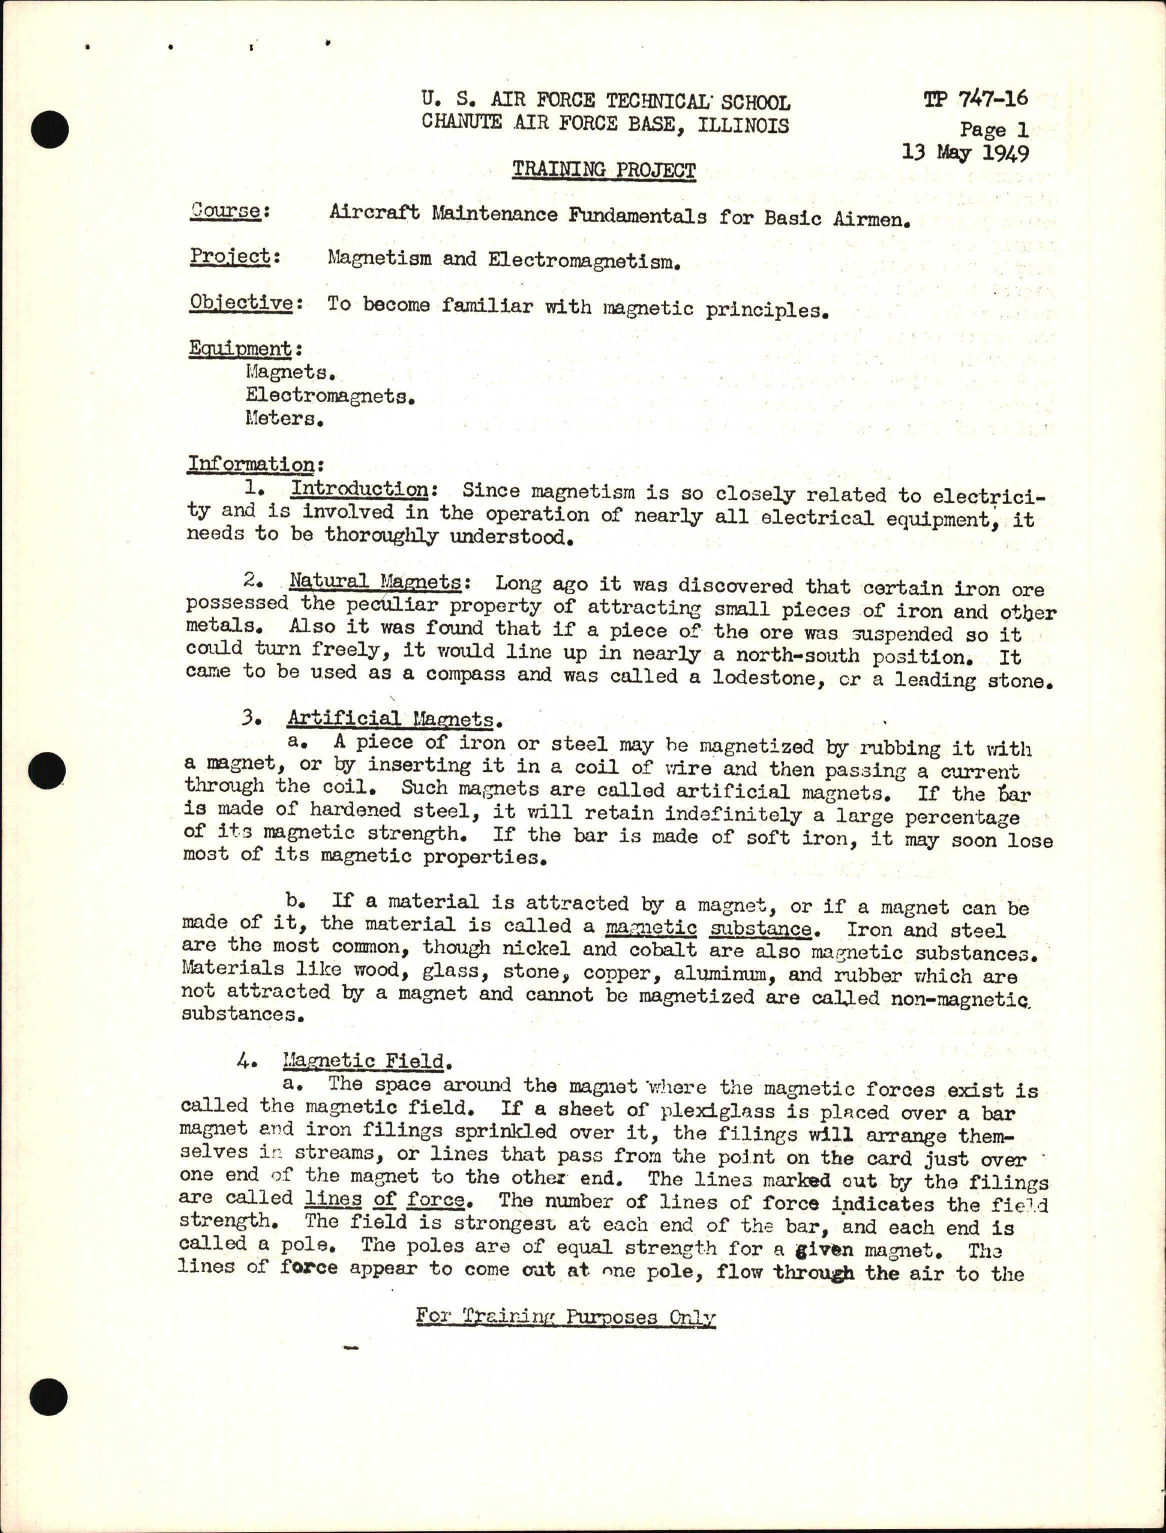 Sample page 1 from AirCorps Library document: Training Project, Magnetism and Electromagnetism